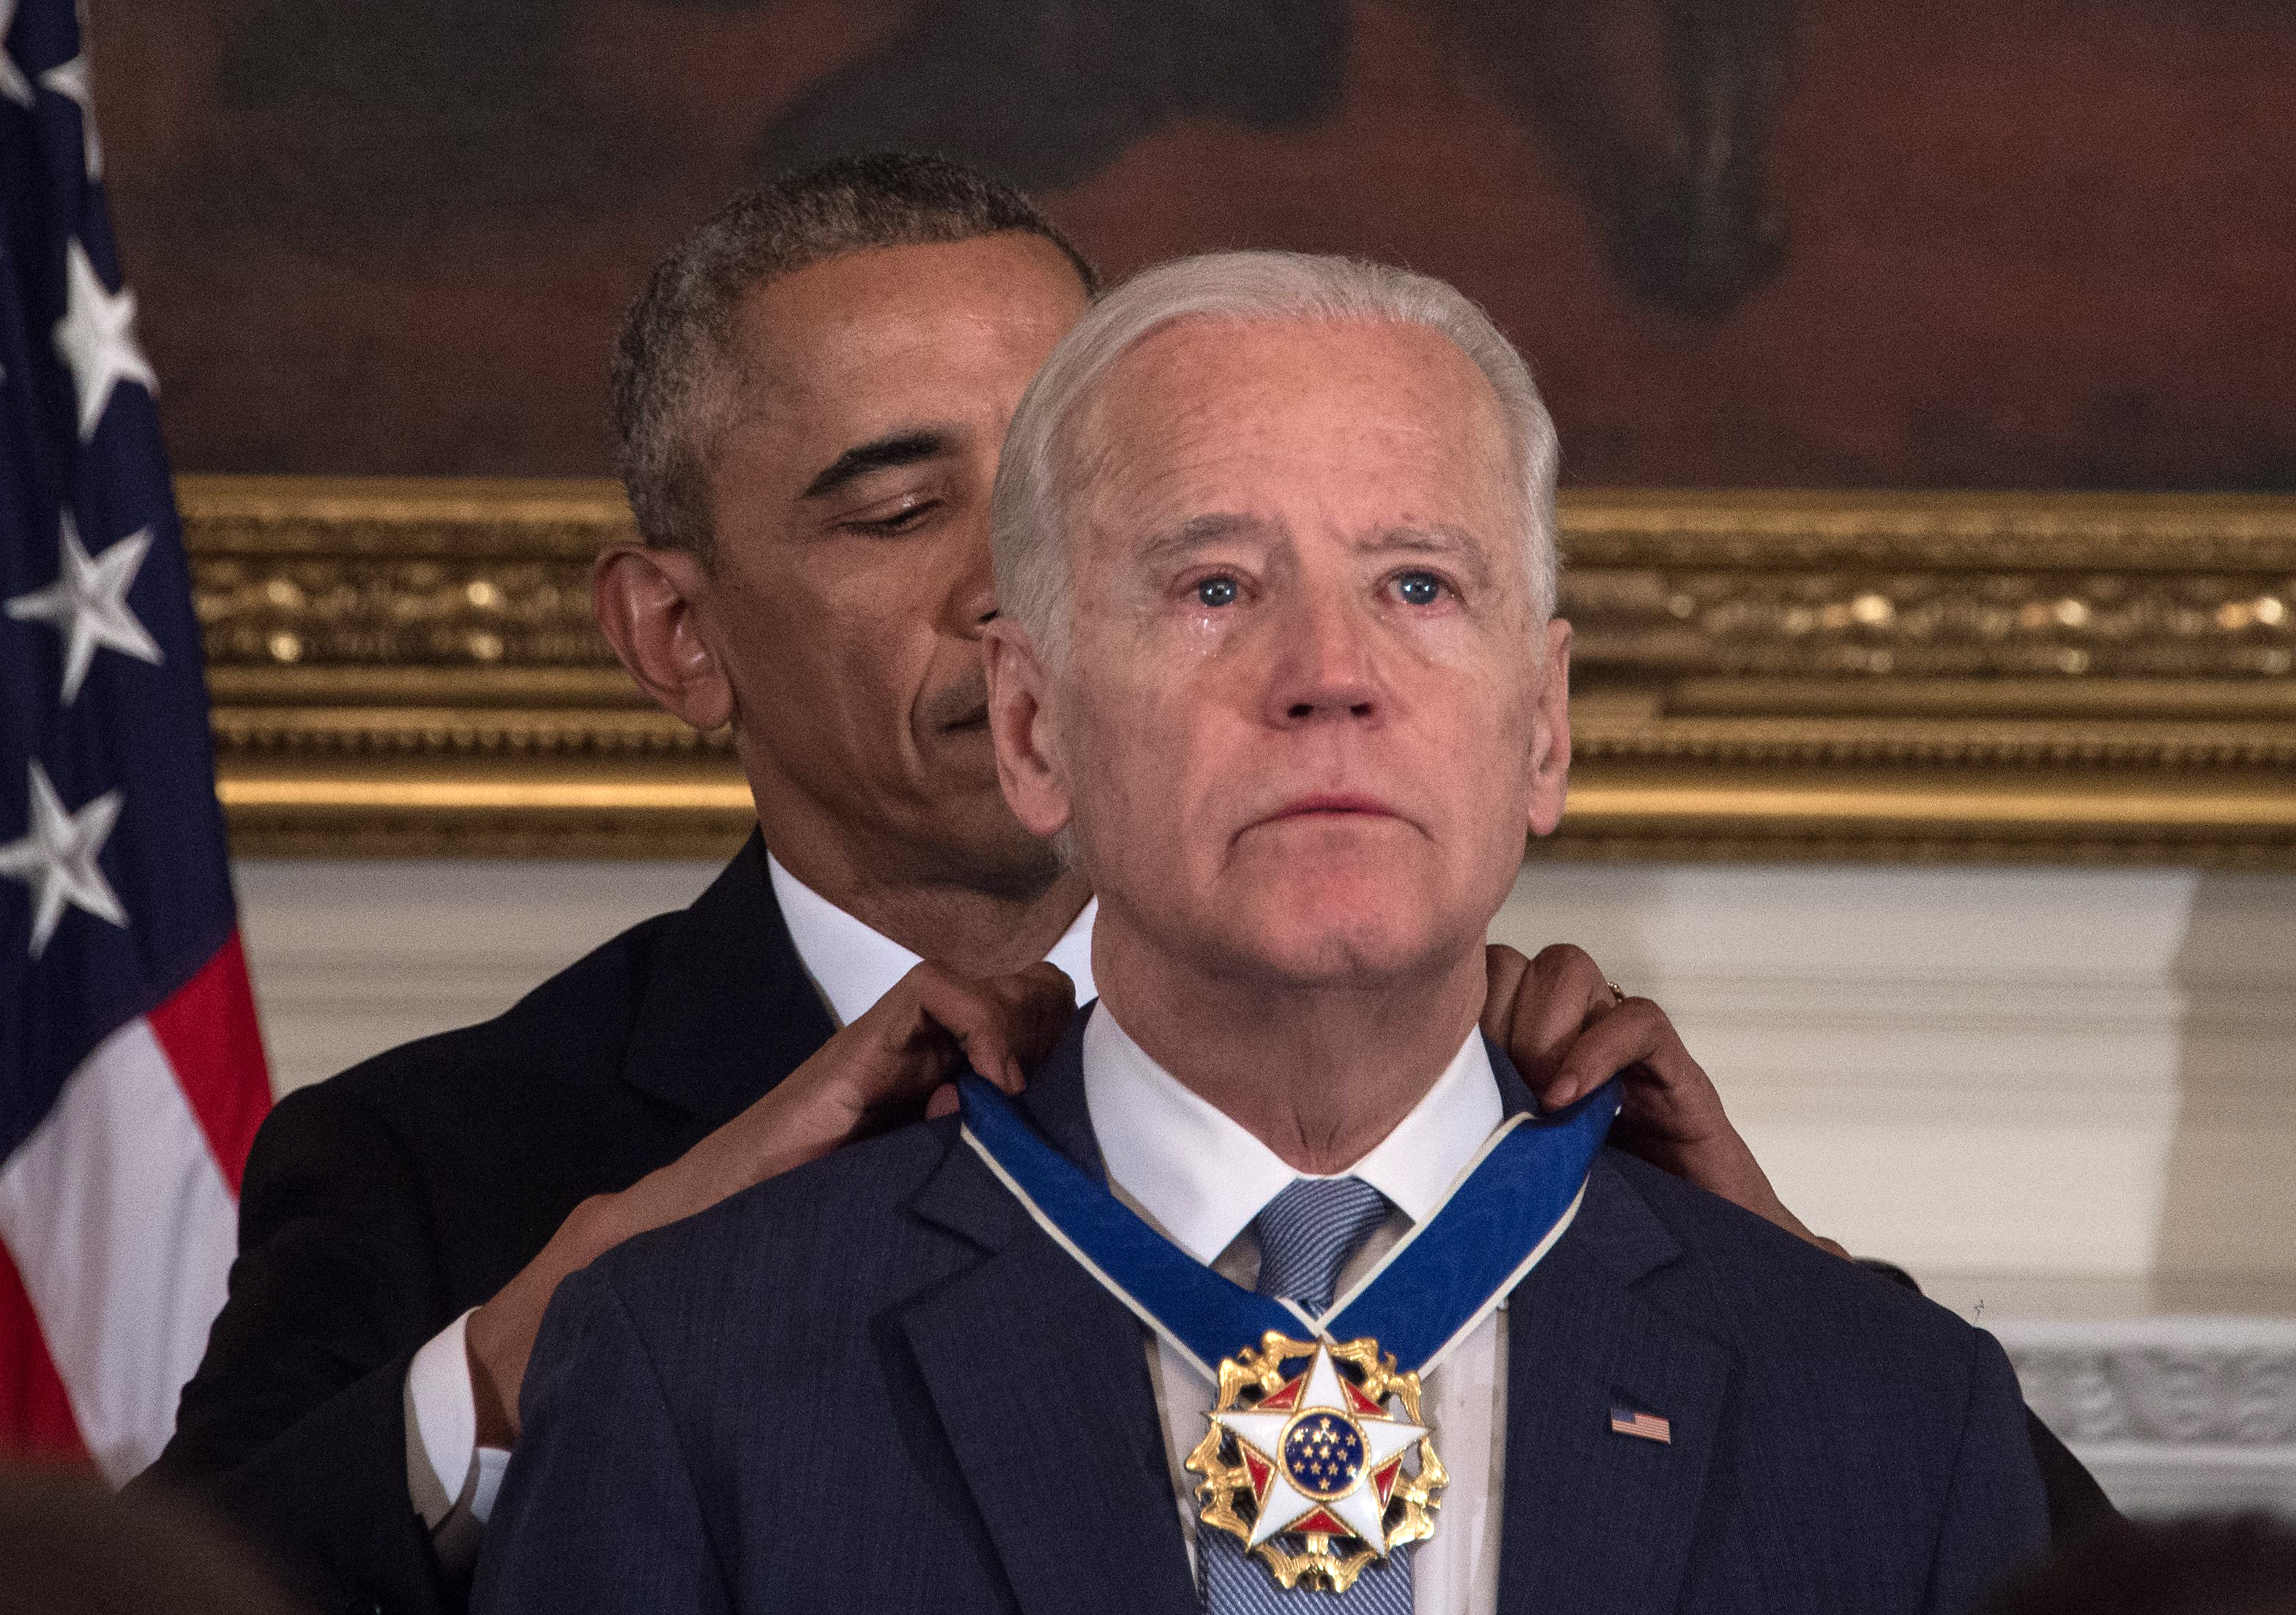 US President Barack Obama awards Vice President Joe Biden the Presidential Medal of Freedom during a tribute to Biden at the White House in Washington, DC, on January 12, 2017. / AFP PHOTO / NICHOLAS KAMM